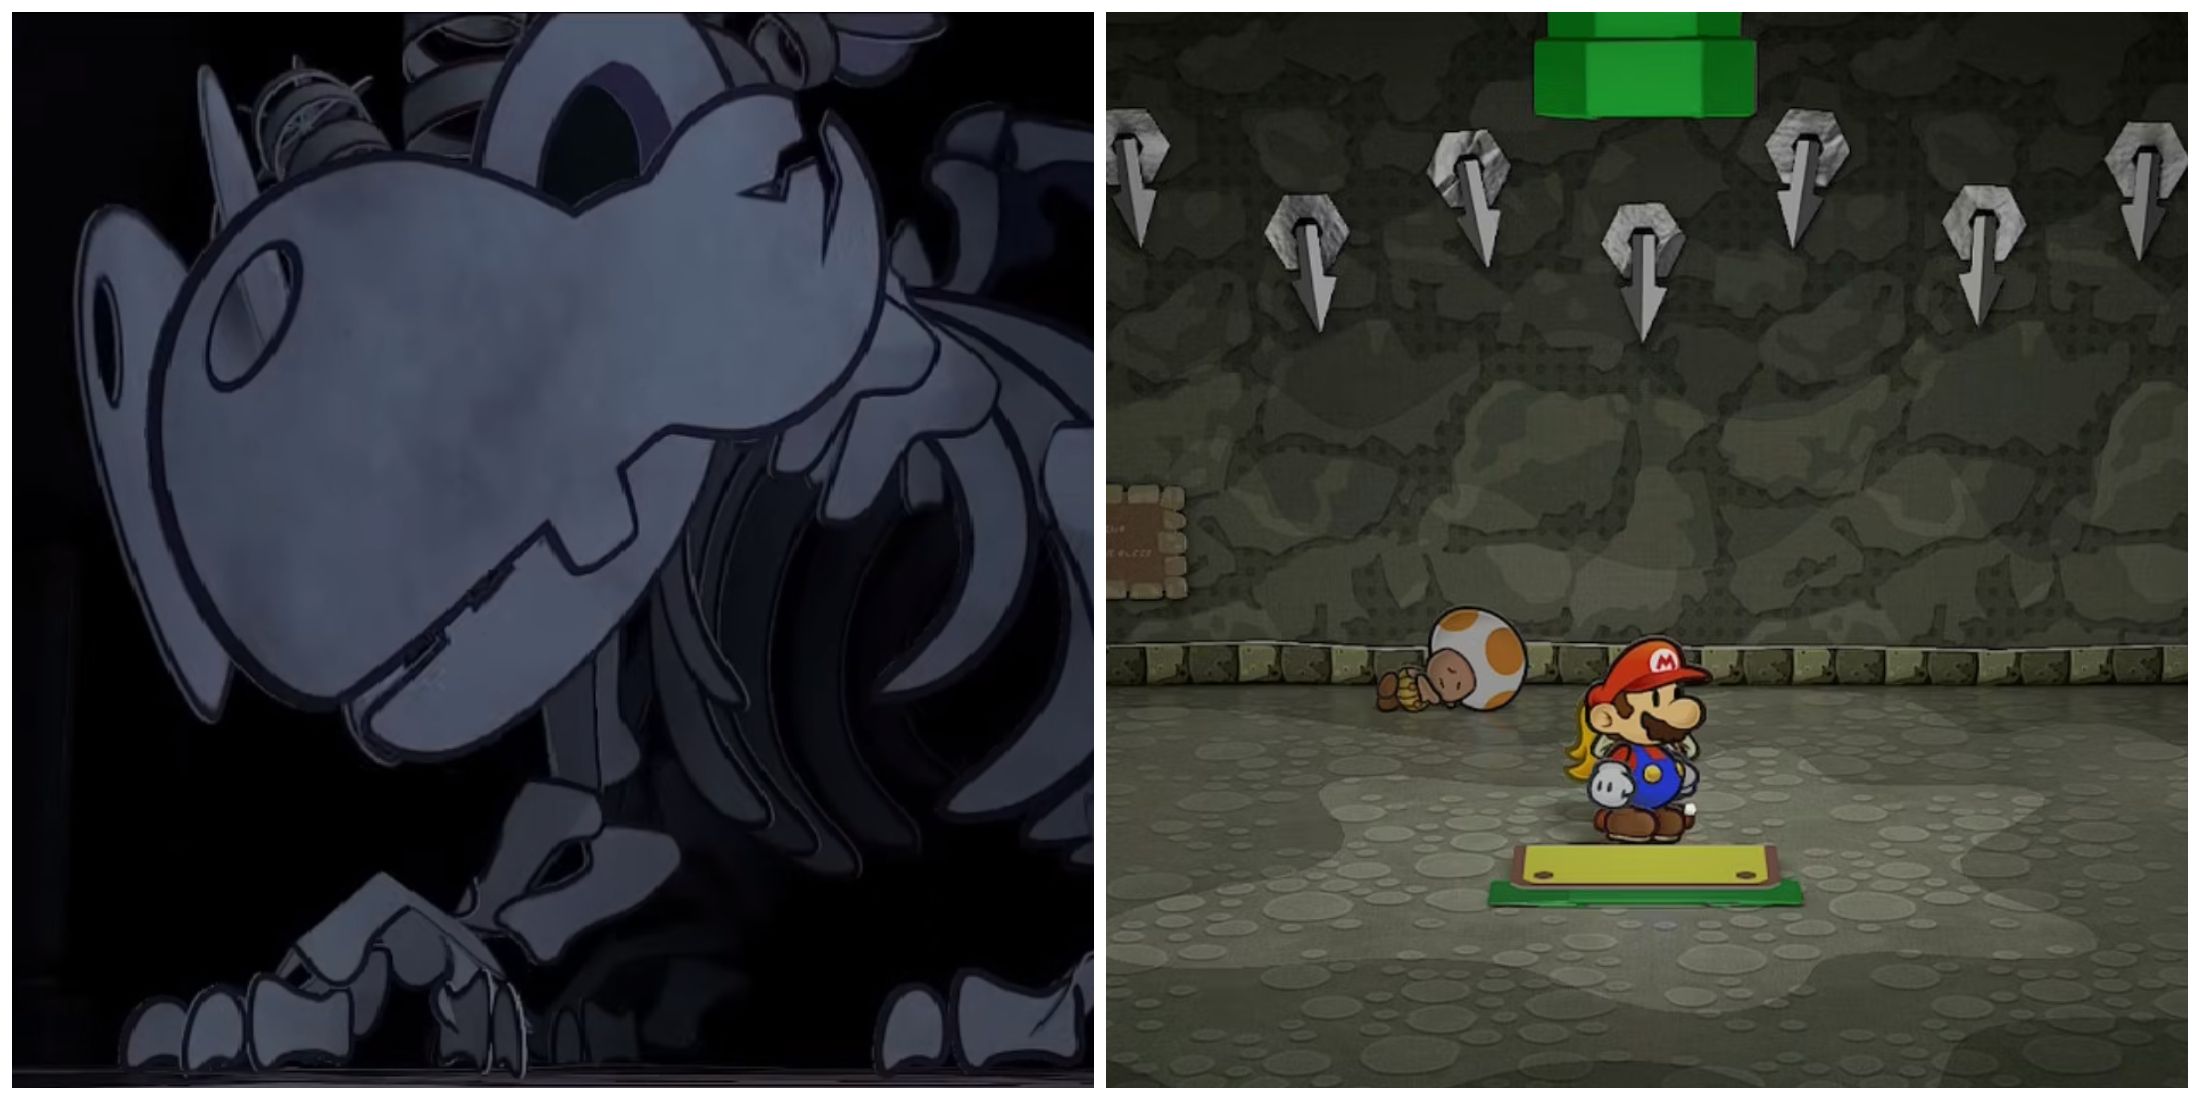 Split image of the boss Bonetail and the Pit of 100 Trials in Paper Mario TTYD